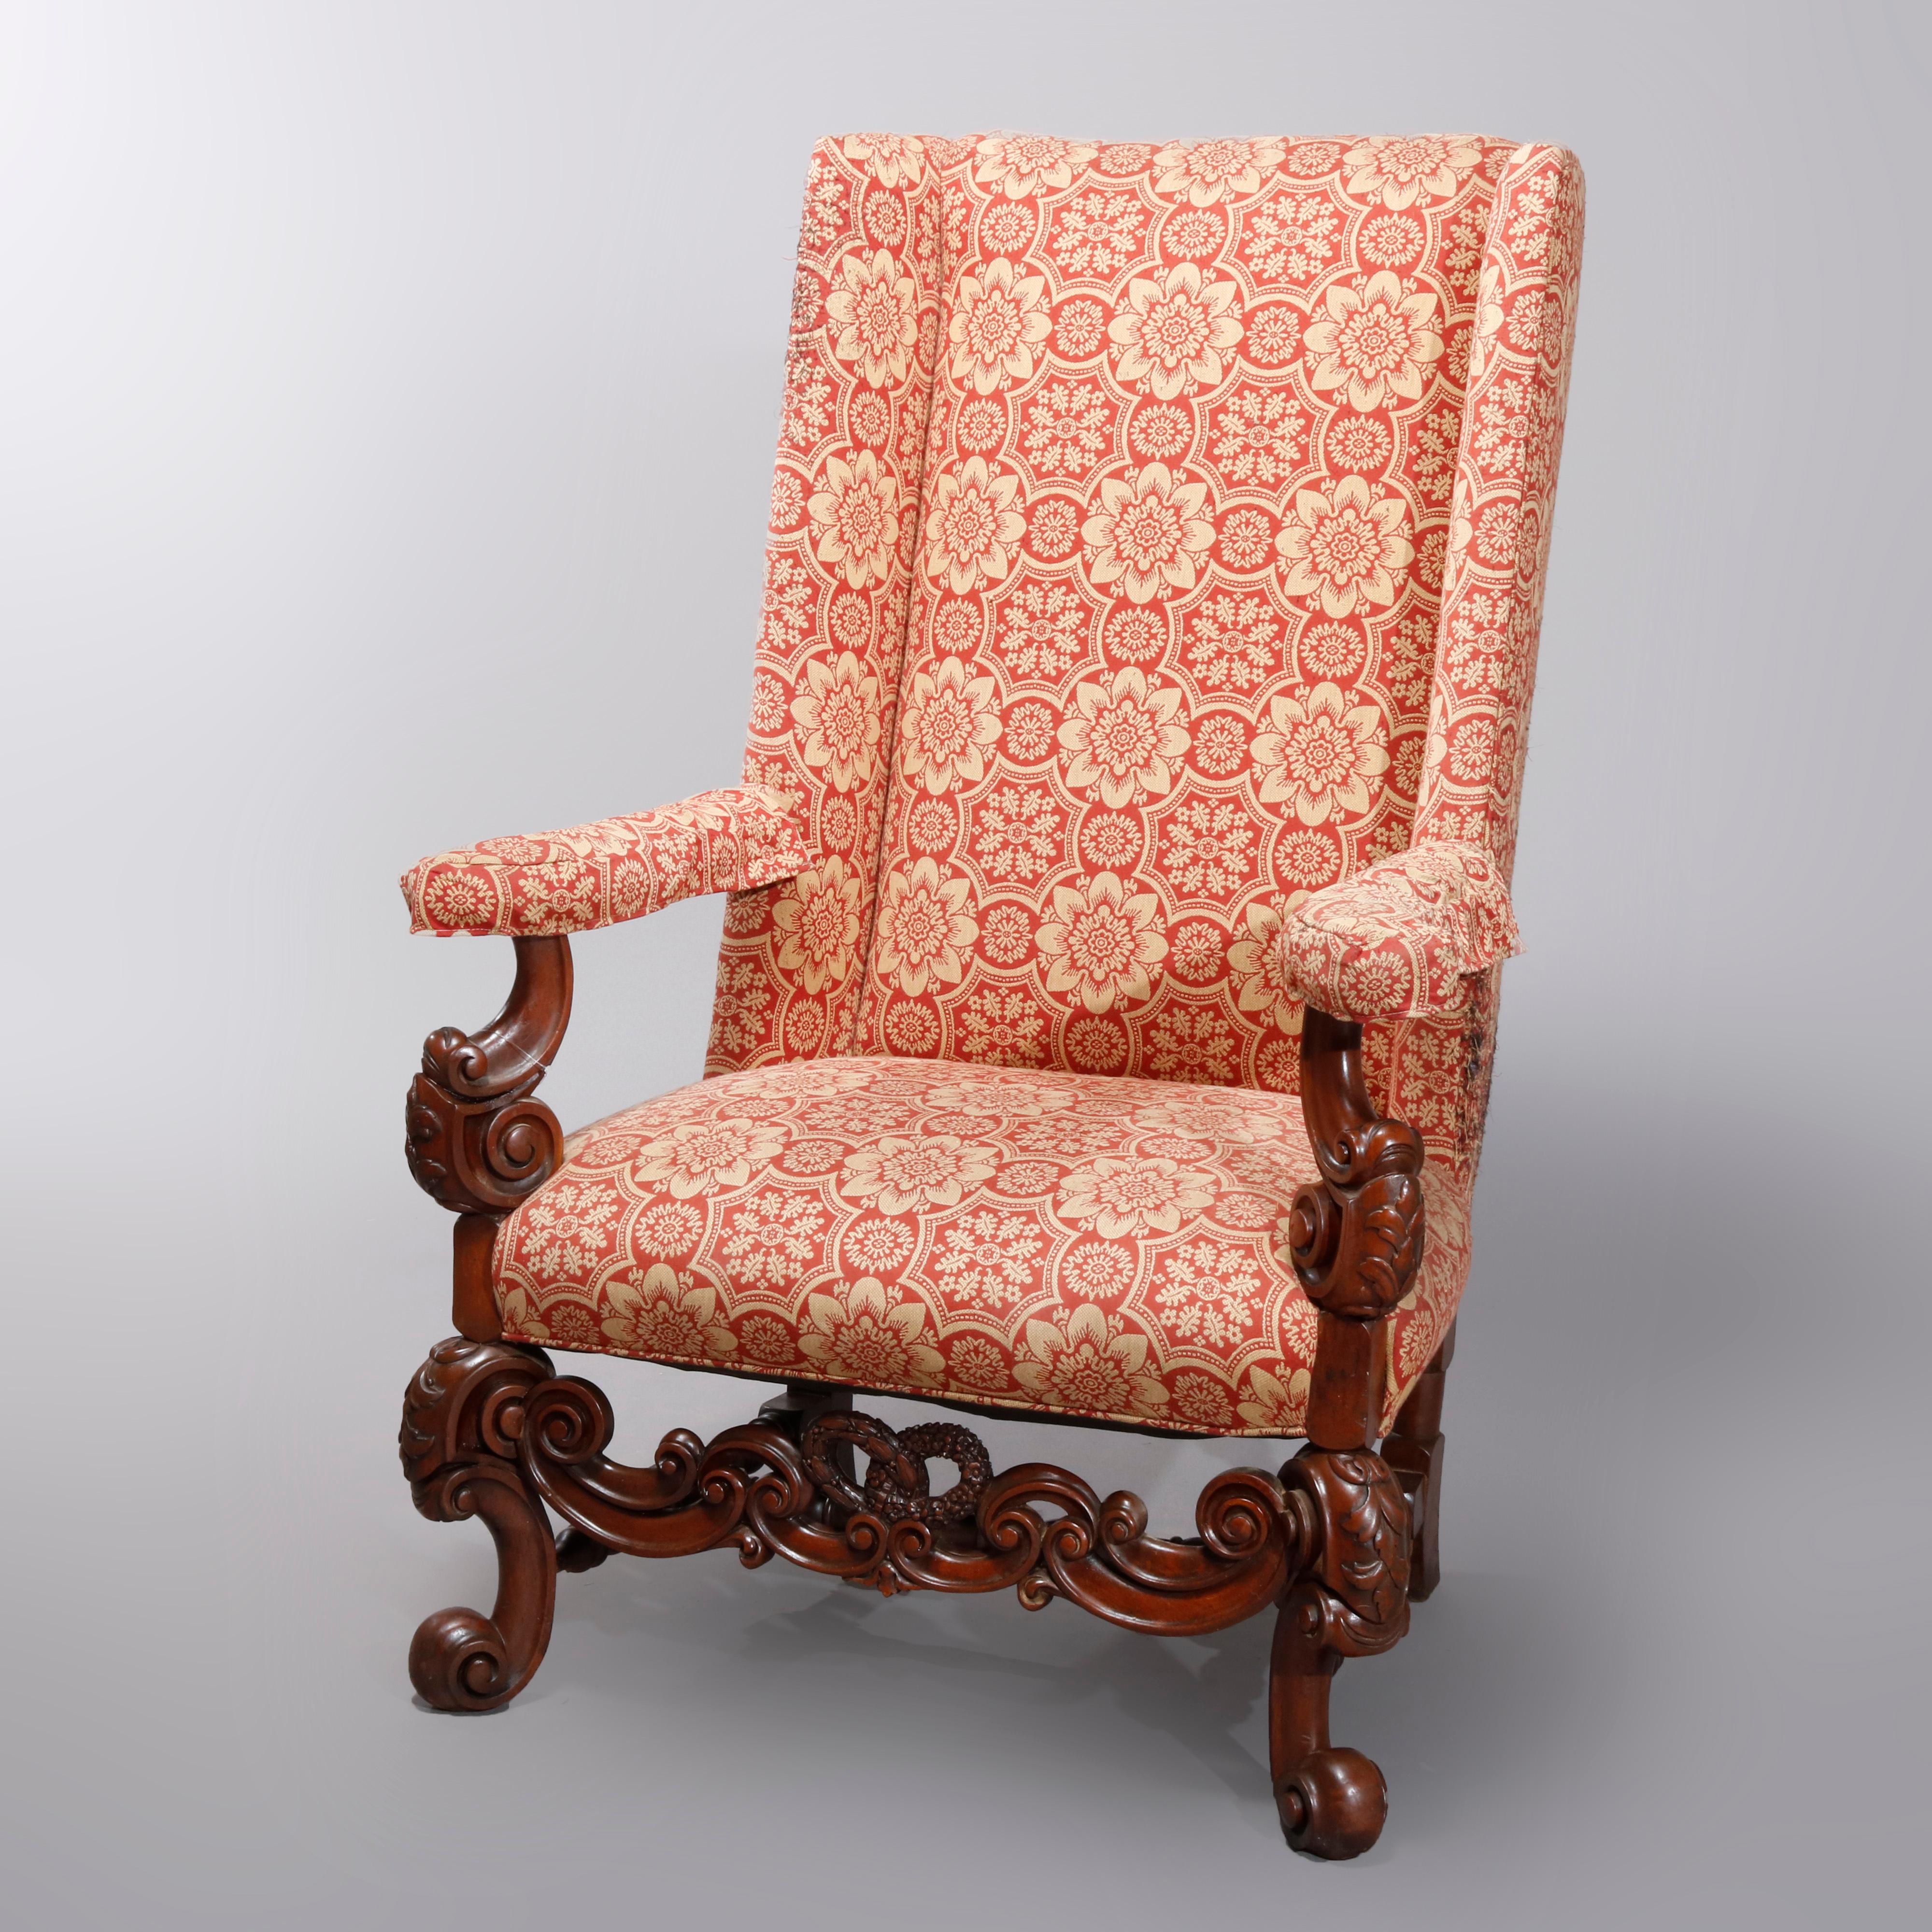 An antique Continental baroque tall fireside armchair offer upholstered high wing back and seat with carved walnut frame having scroll form flared arms, cabriole legs and stretcher, and newly upholstered, circa 1910

Measures: 49.5